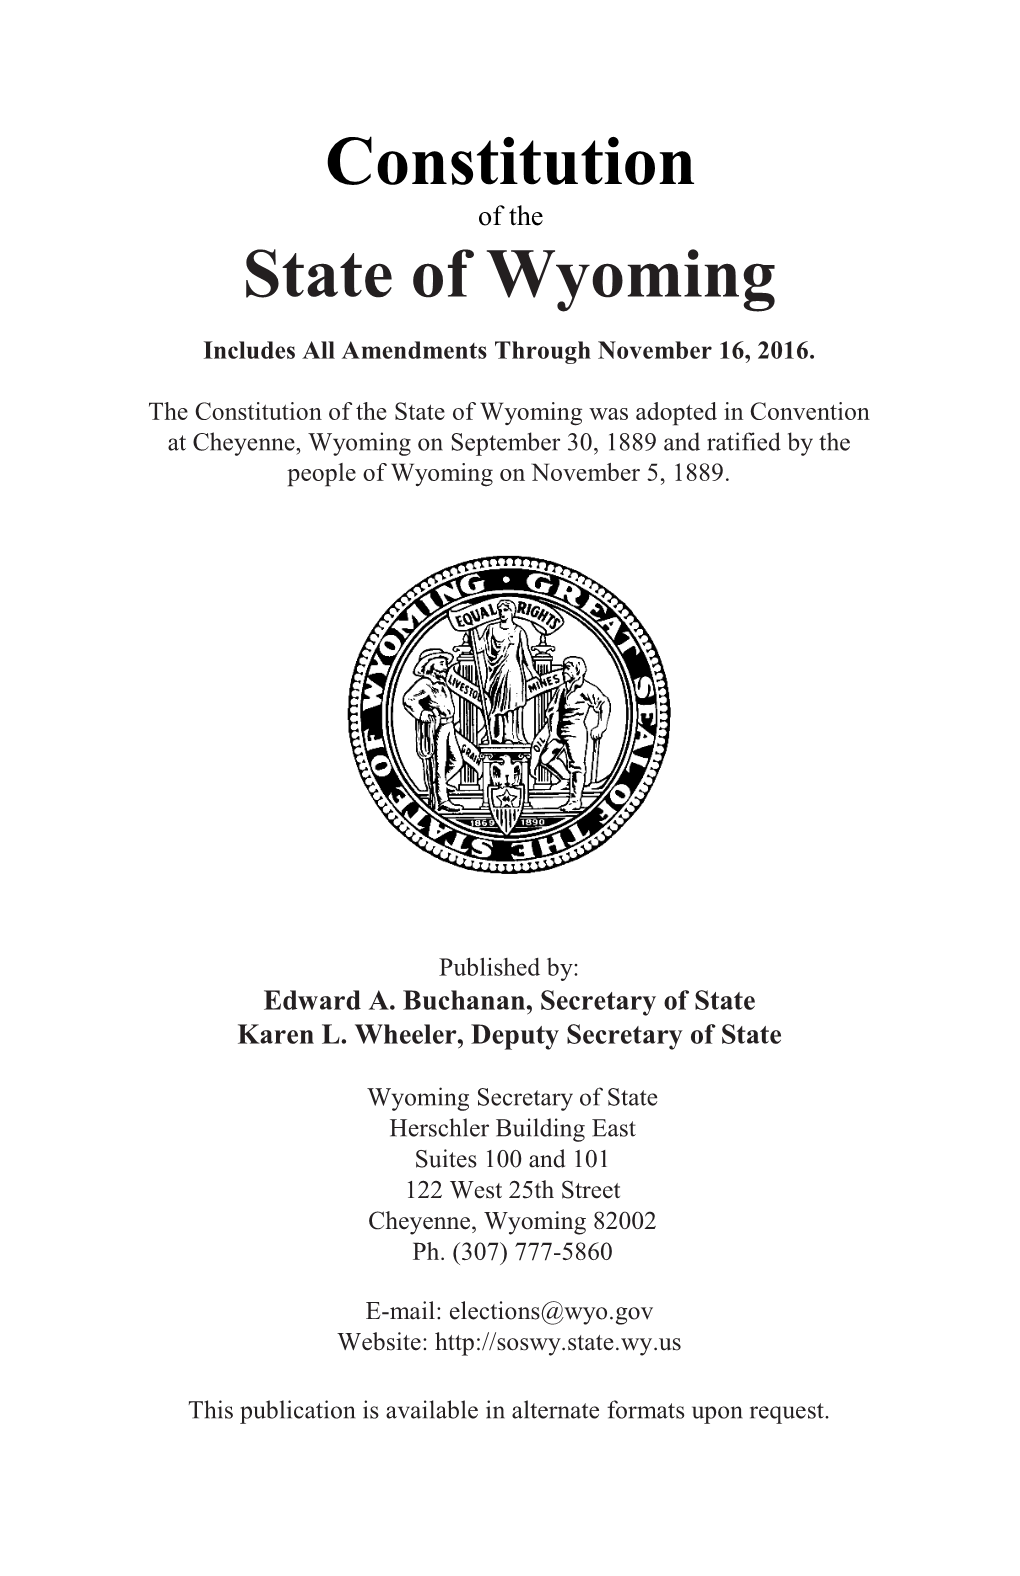 Wyoming Constitution Is the Foundation of Wyoming’S Laws and Is Our State’S Most Essential Document - Preserving Our Liberty and Justice in Wyoming